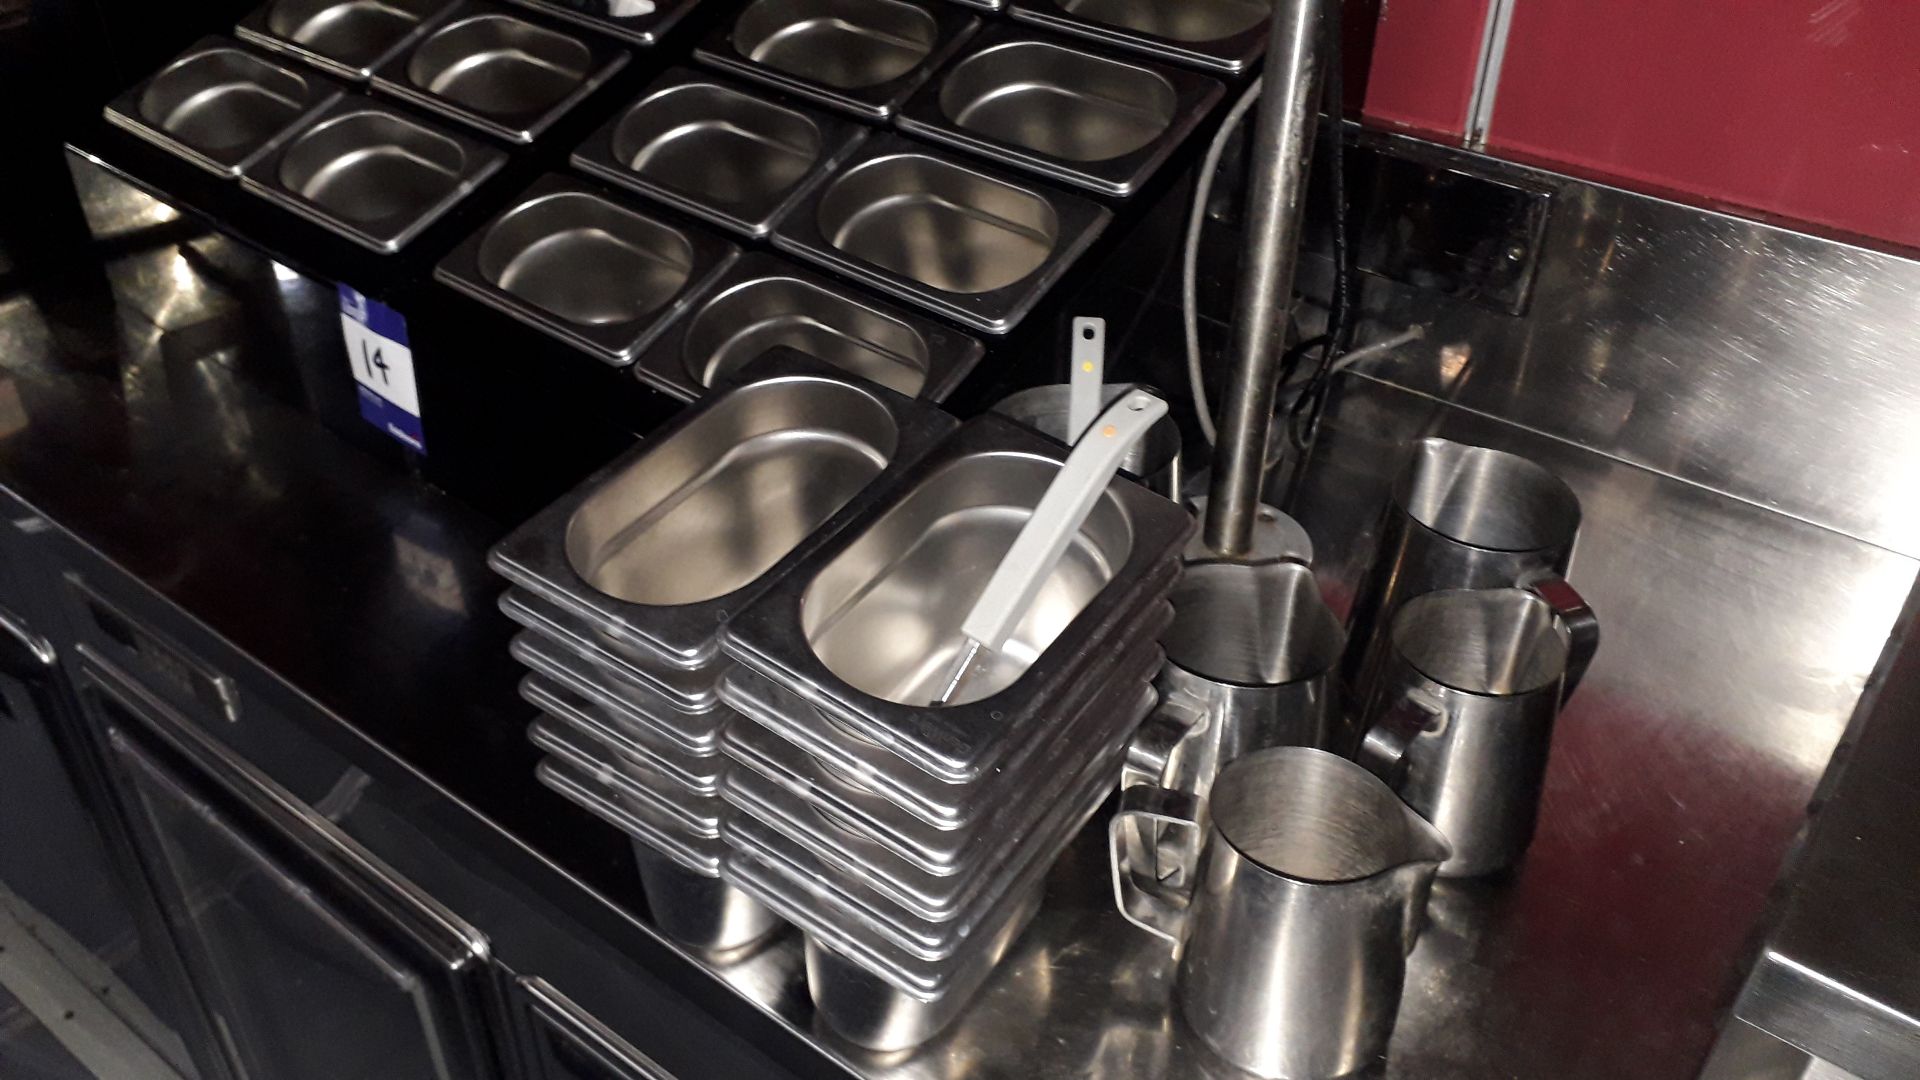 2 x slanted 8 x 1/9 gastro pan display bar, with 12 x 1/9 Gastro pans, Stainless Steel pouring jugs, - Image 2 of 4